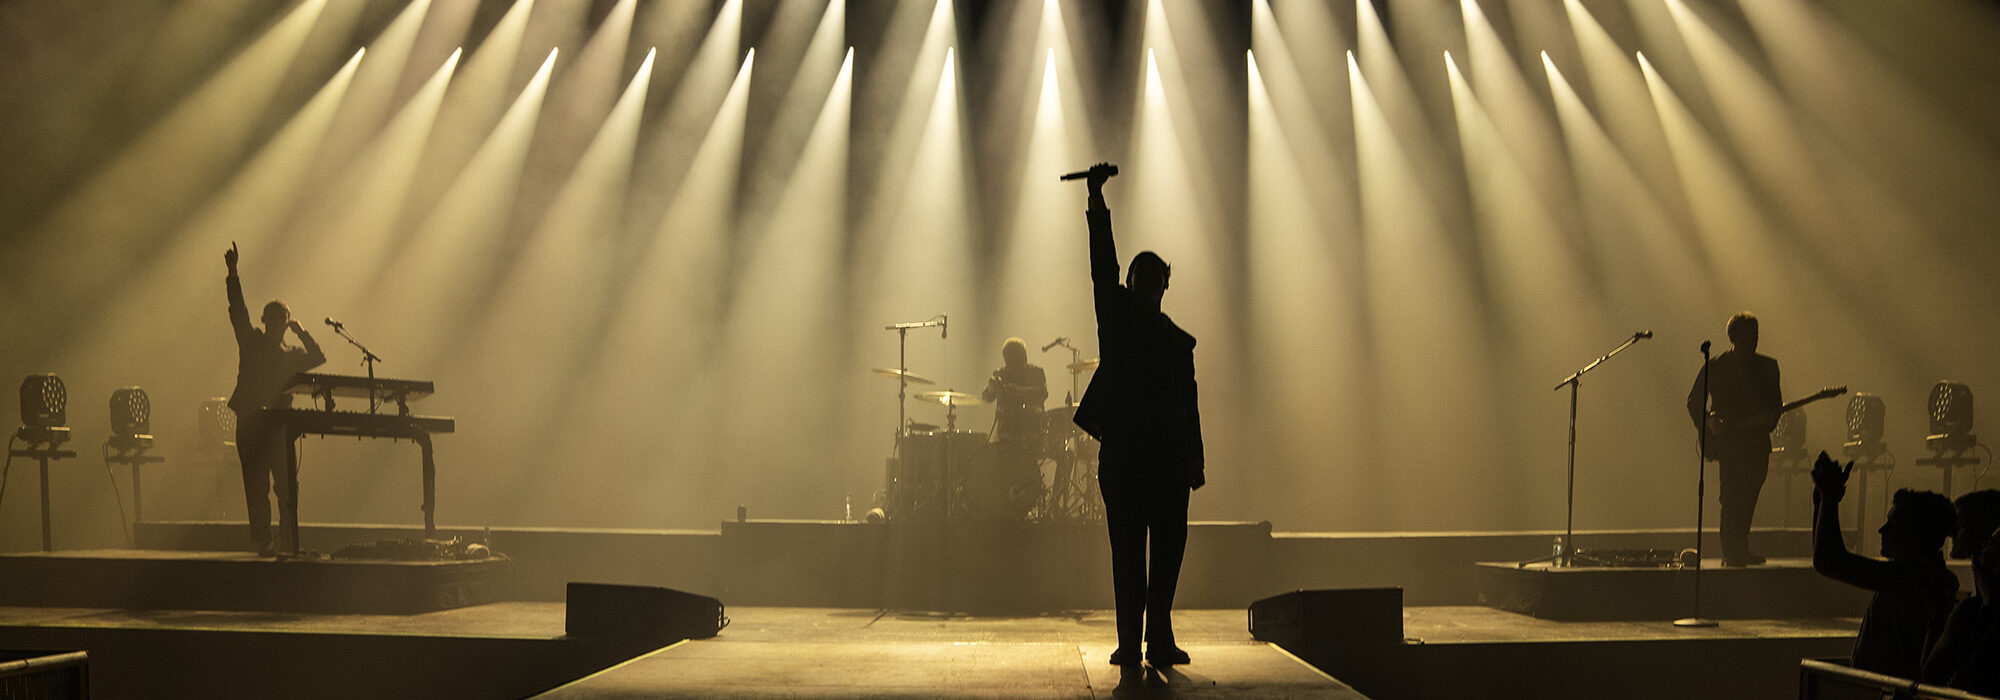 band-on-stage-in-silhouette-2000x700-1_landscape_2000x700.jpeg